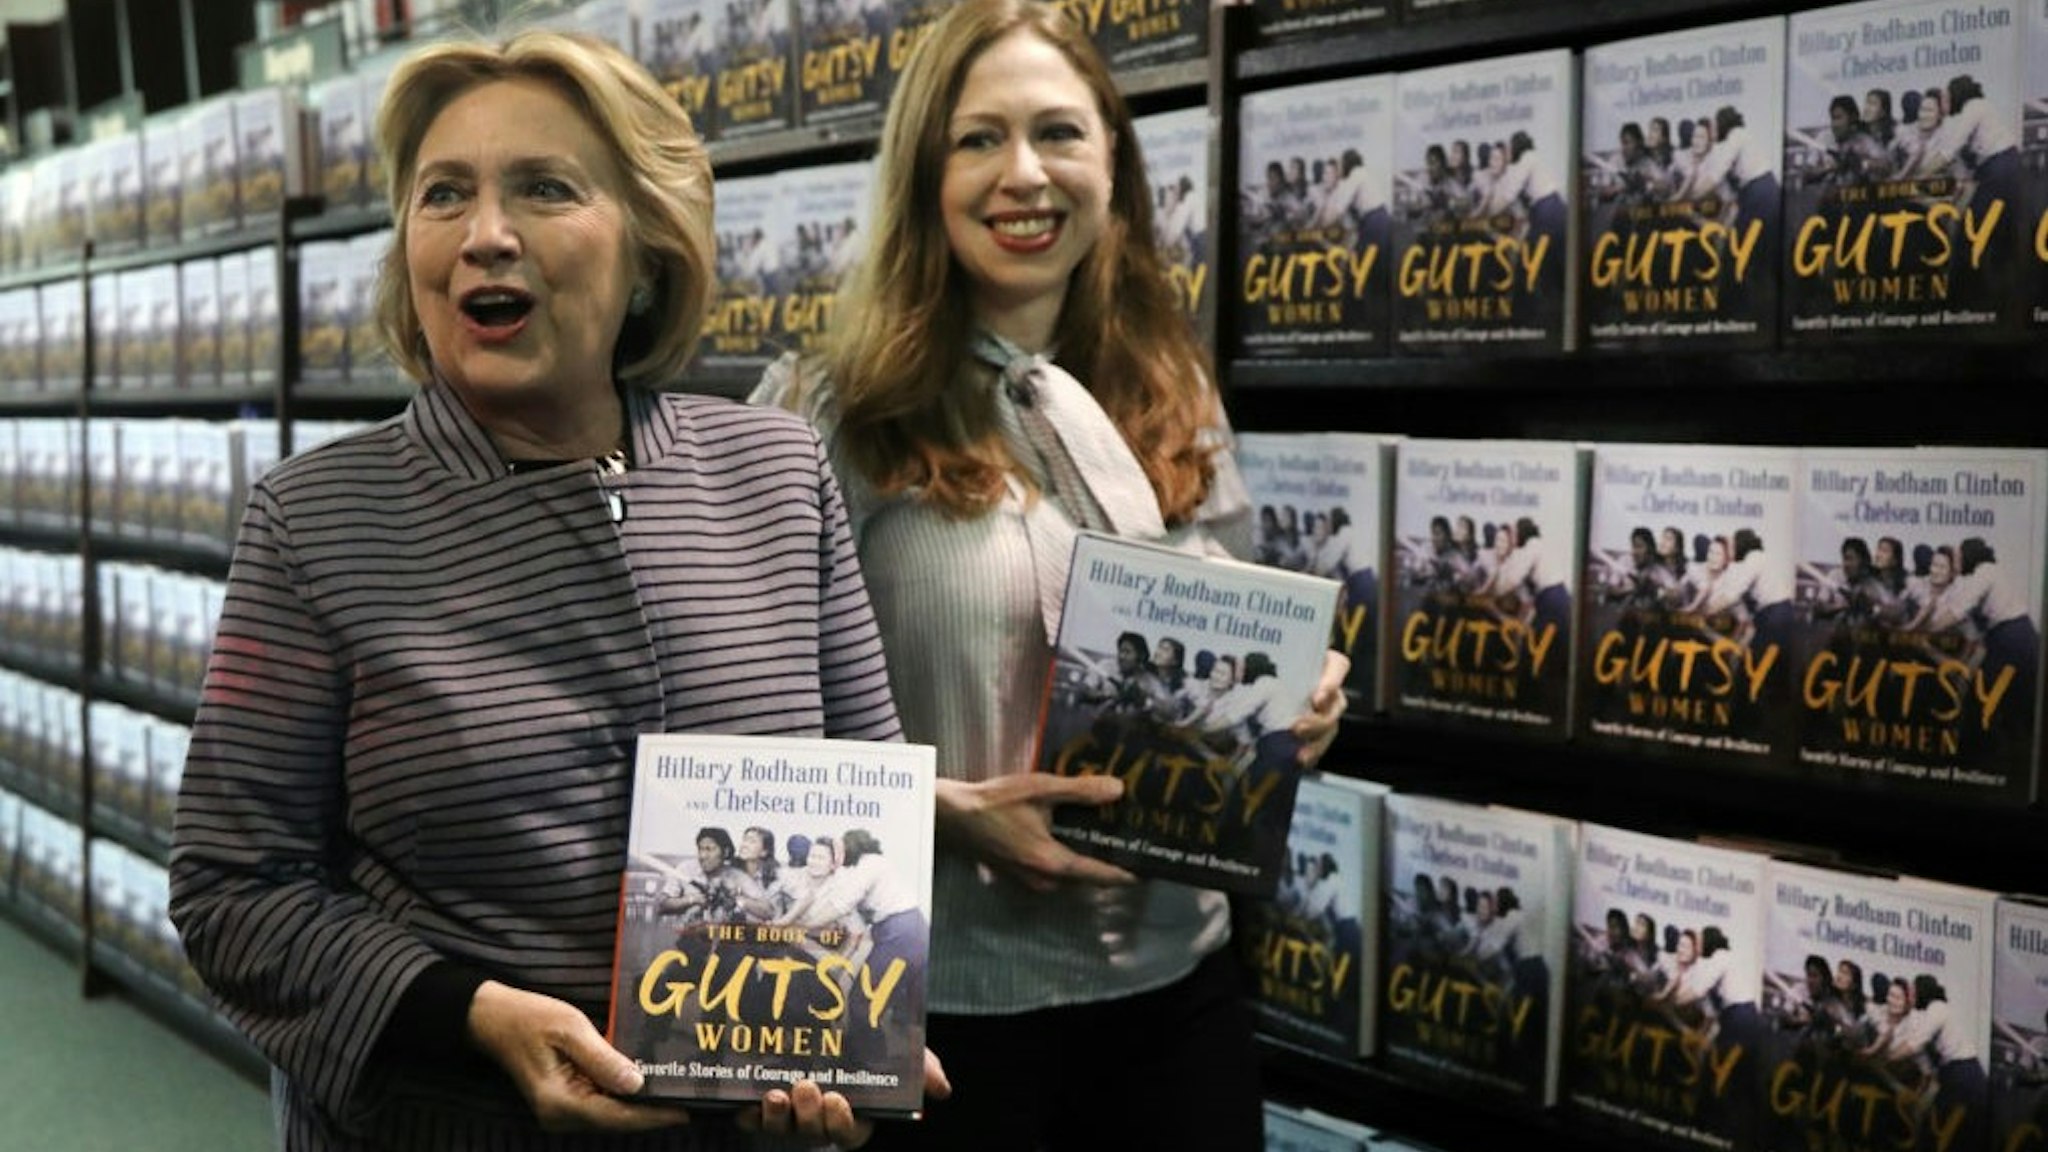 Chelsea and Hillary Clinton pose with their new book "The Book of Gutsy Women" on October 03, 2019 in New York City. The new book by mother and daughter co-authors celebrates women in history, many of whom have been overlooked, that have stood up to adversity. (Photo by Spencer Platt/Getty Images)